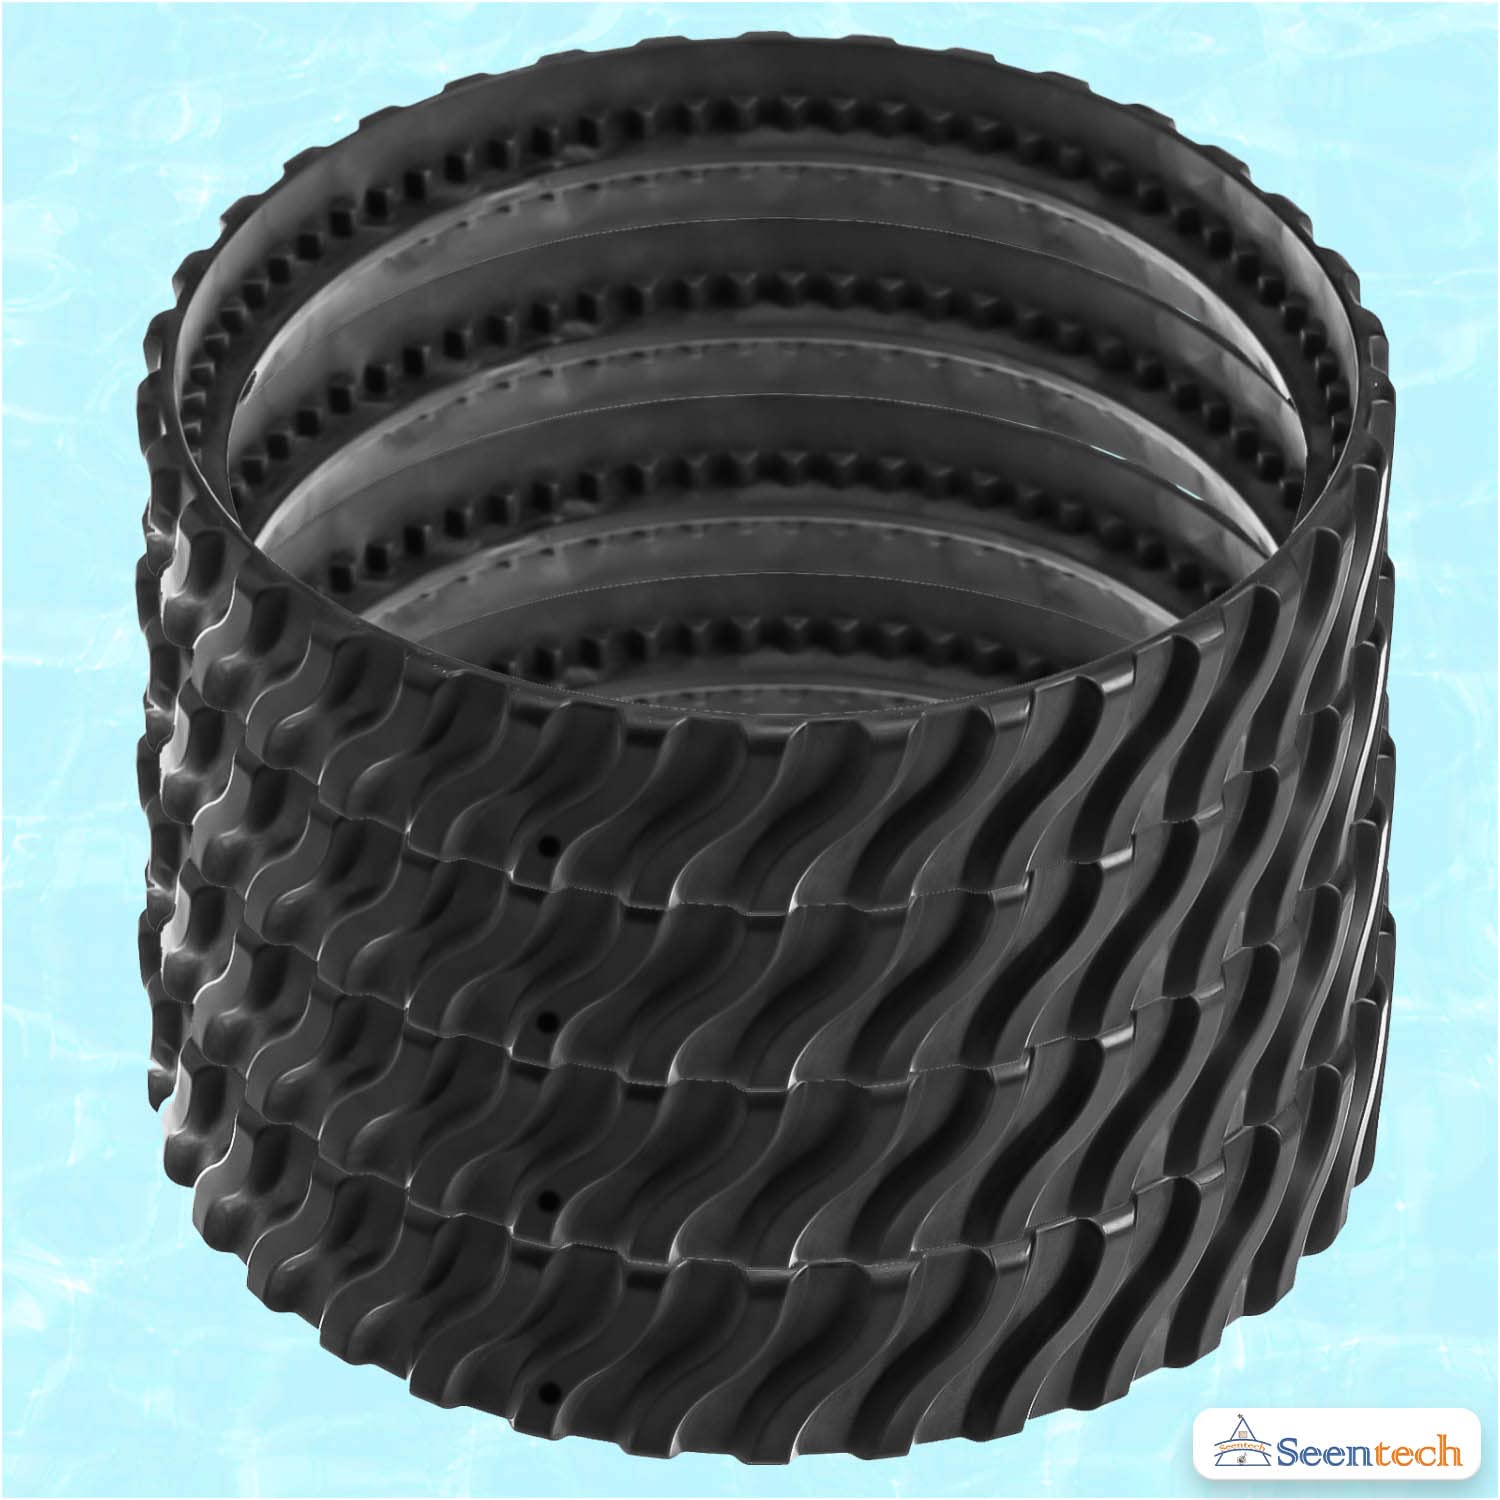 Seentech R0526100 Exact Track Replacement Compatible with MX8/MX6 In-Ground Pool Cleaner - Heavy Duty Rubber - Improves The tire Life Cycle by 50% (Pack 4)